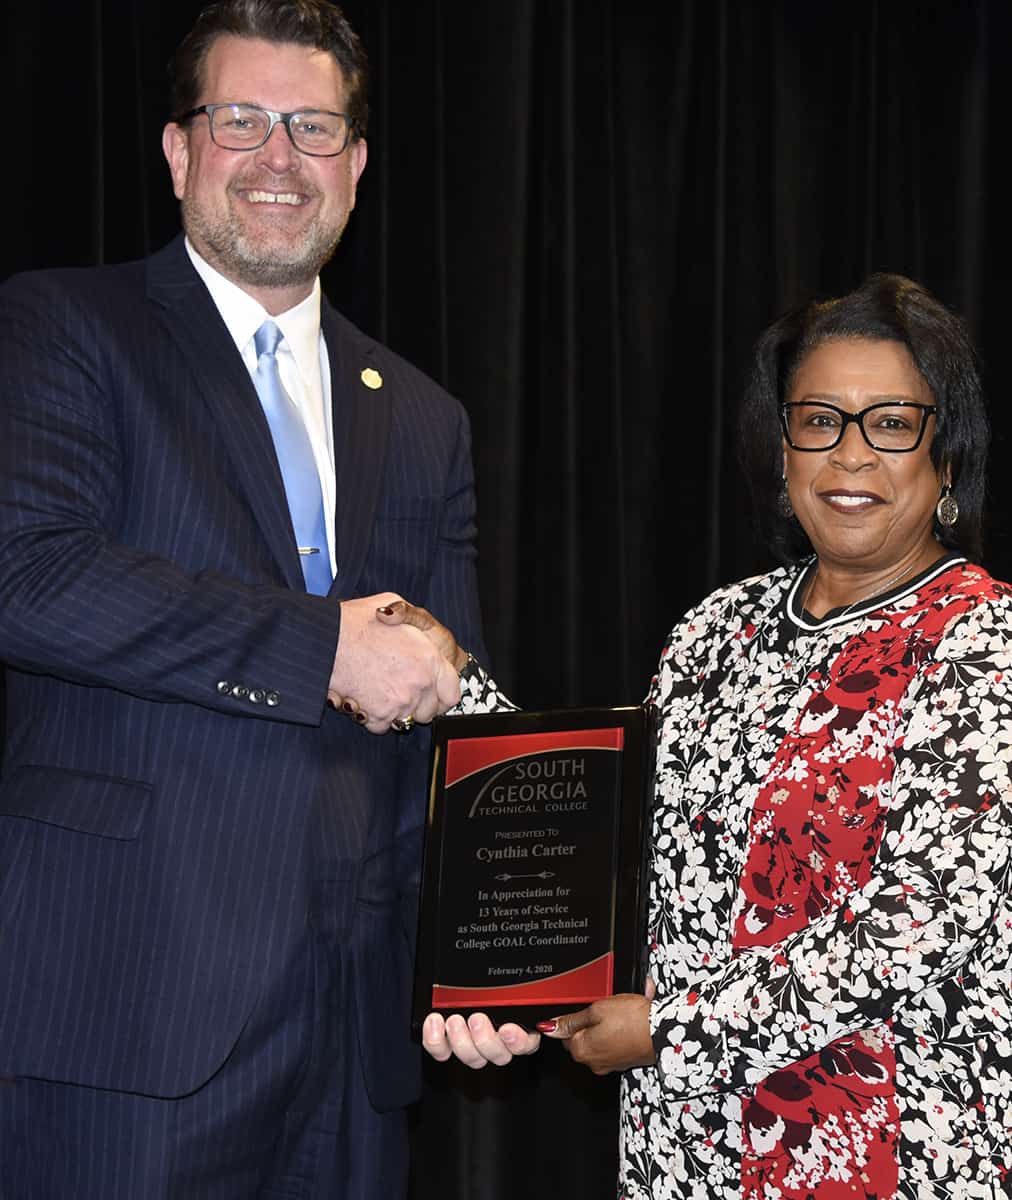 SGTC President Dr. John Watford is shown above (l) presenting former GOAL Coordinator Cynthia Carter with a plaque for her 13 years of service to the SGTC GOAL program.